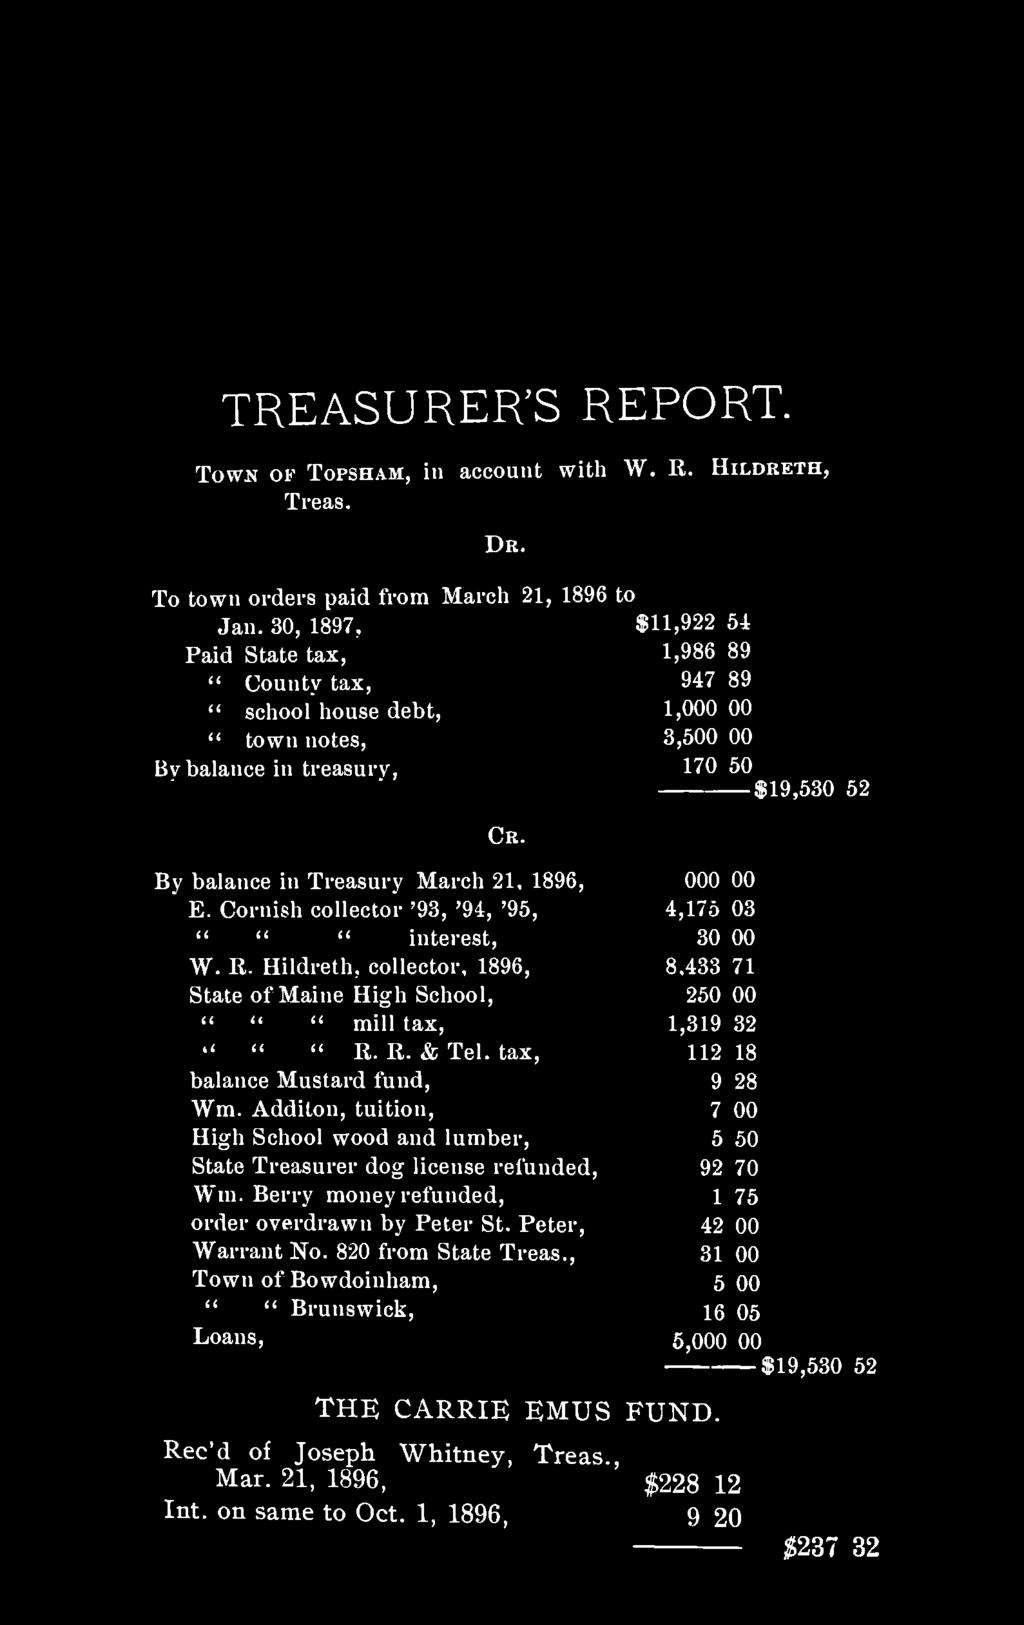 TREASURER'S REPORT. TOWN OF TOPSHAM, in account with W. R. HILDRETH, Treas. DR. To town orders paid from March 21, 1896 to Jan.